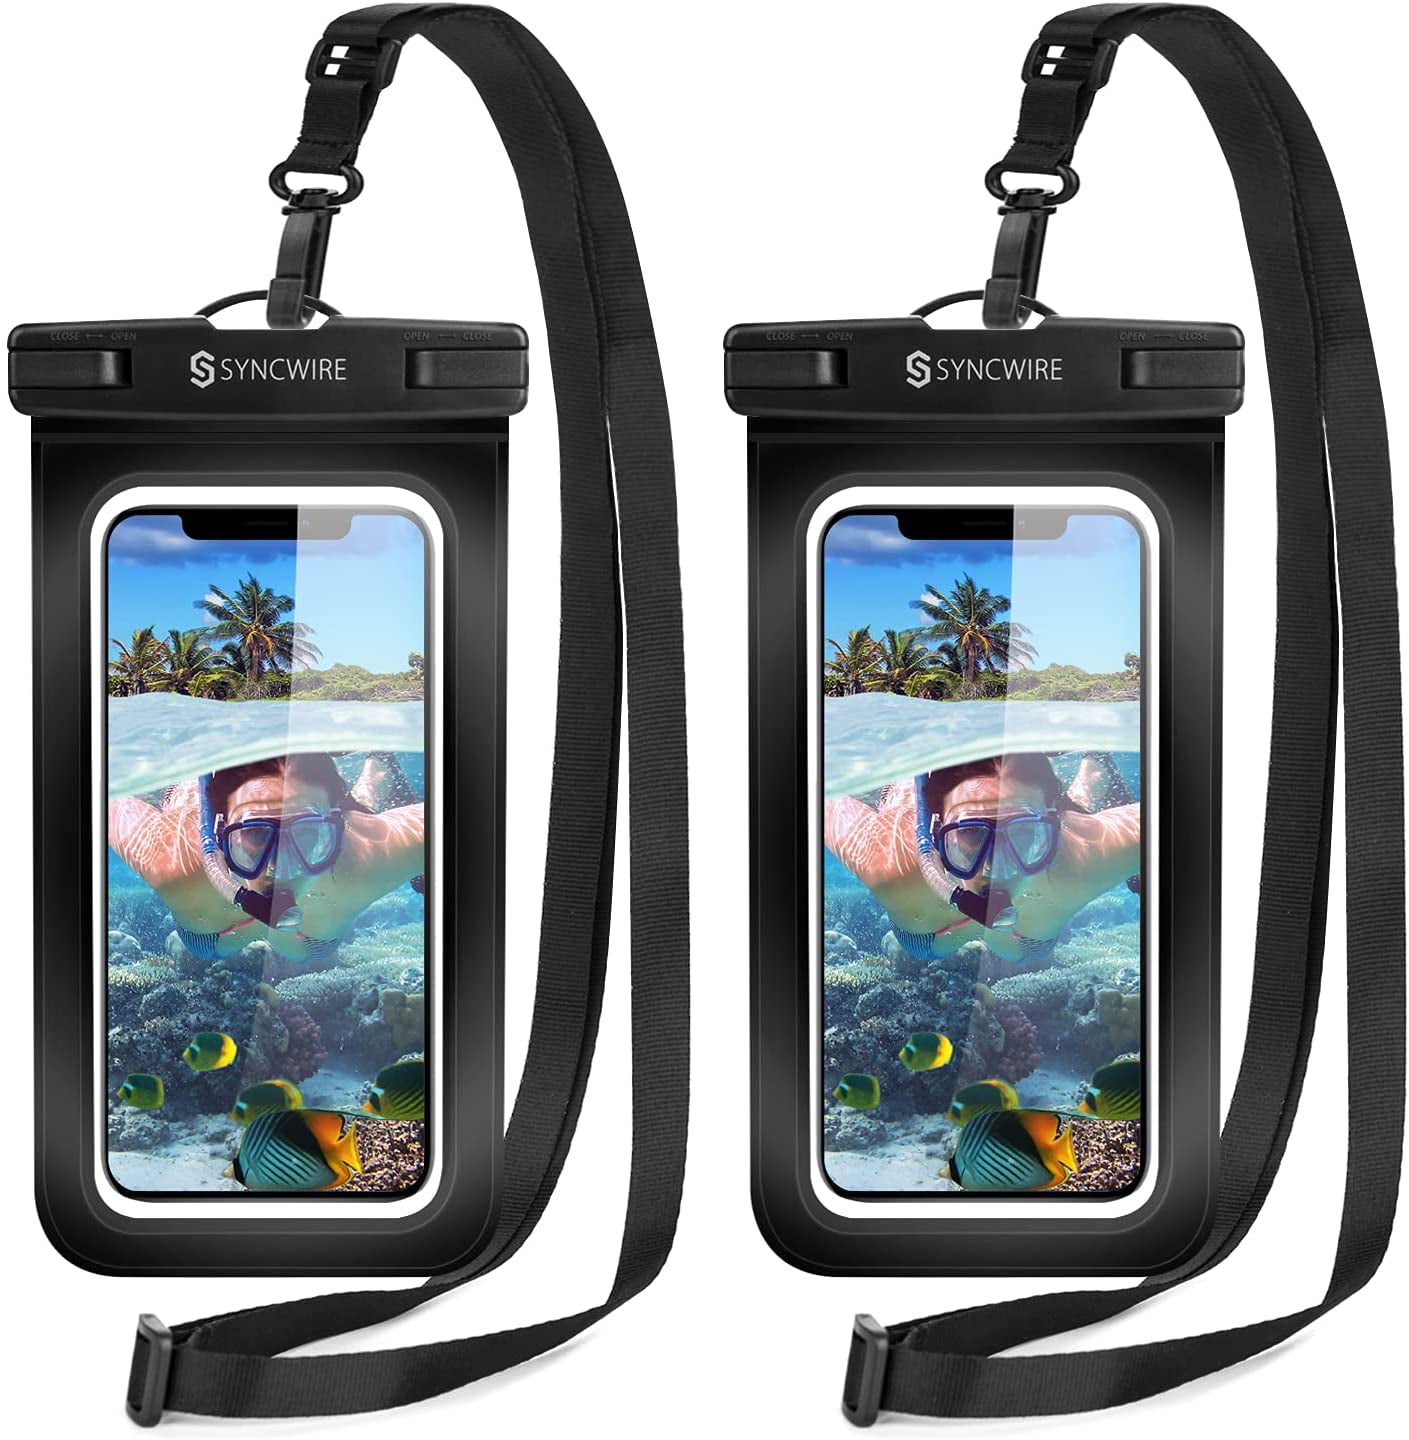 JOTO Universal Waterproof Pouch Cellphone Dry Bag Case for phon up to 7" 